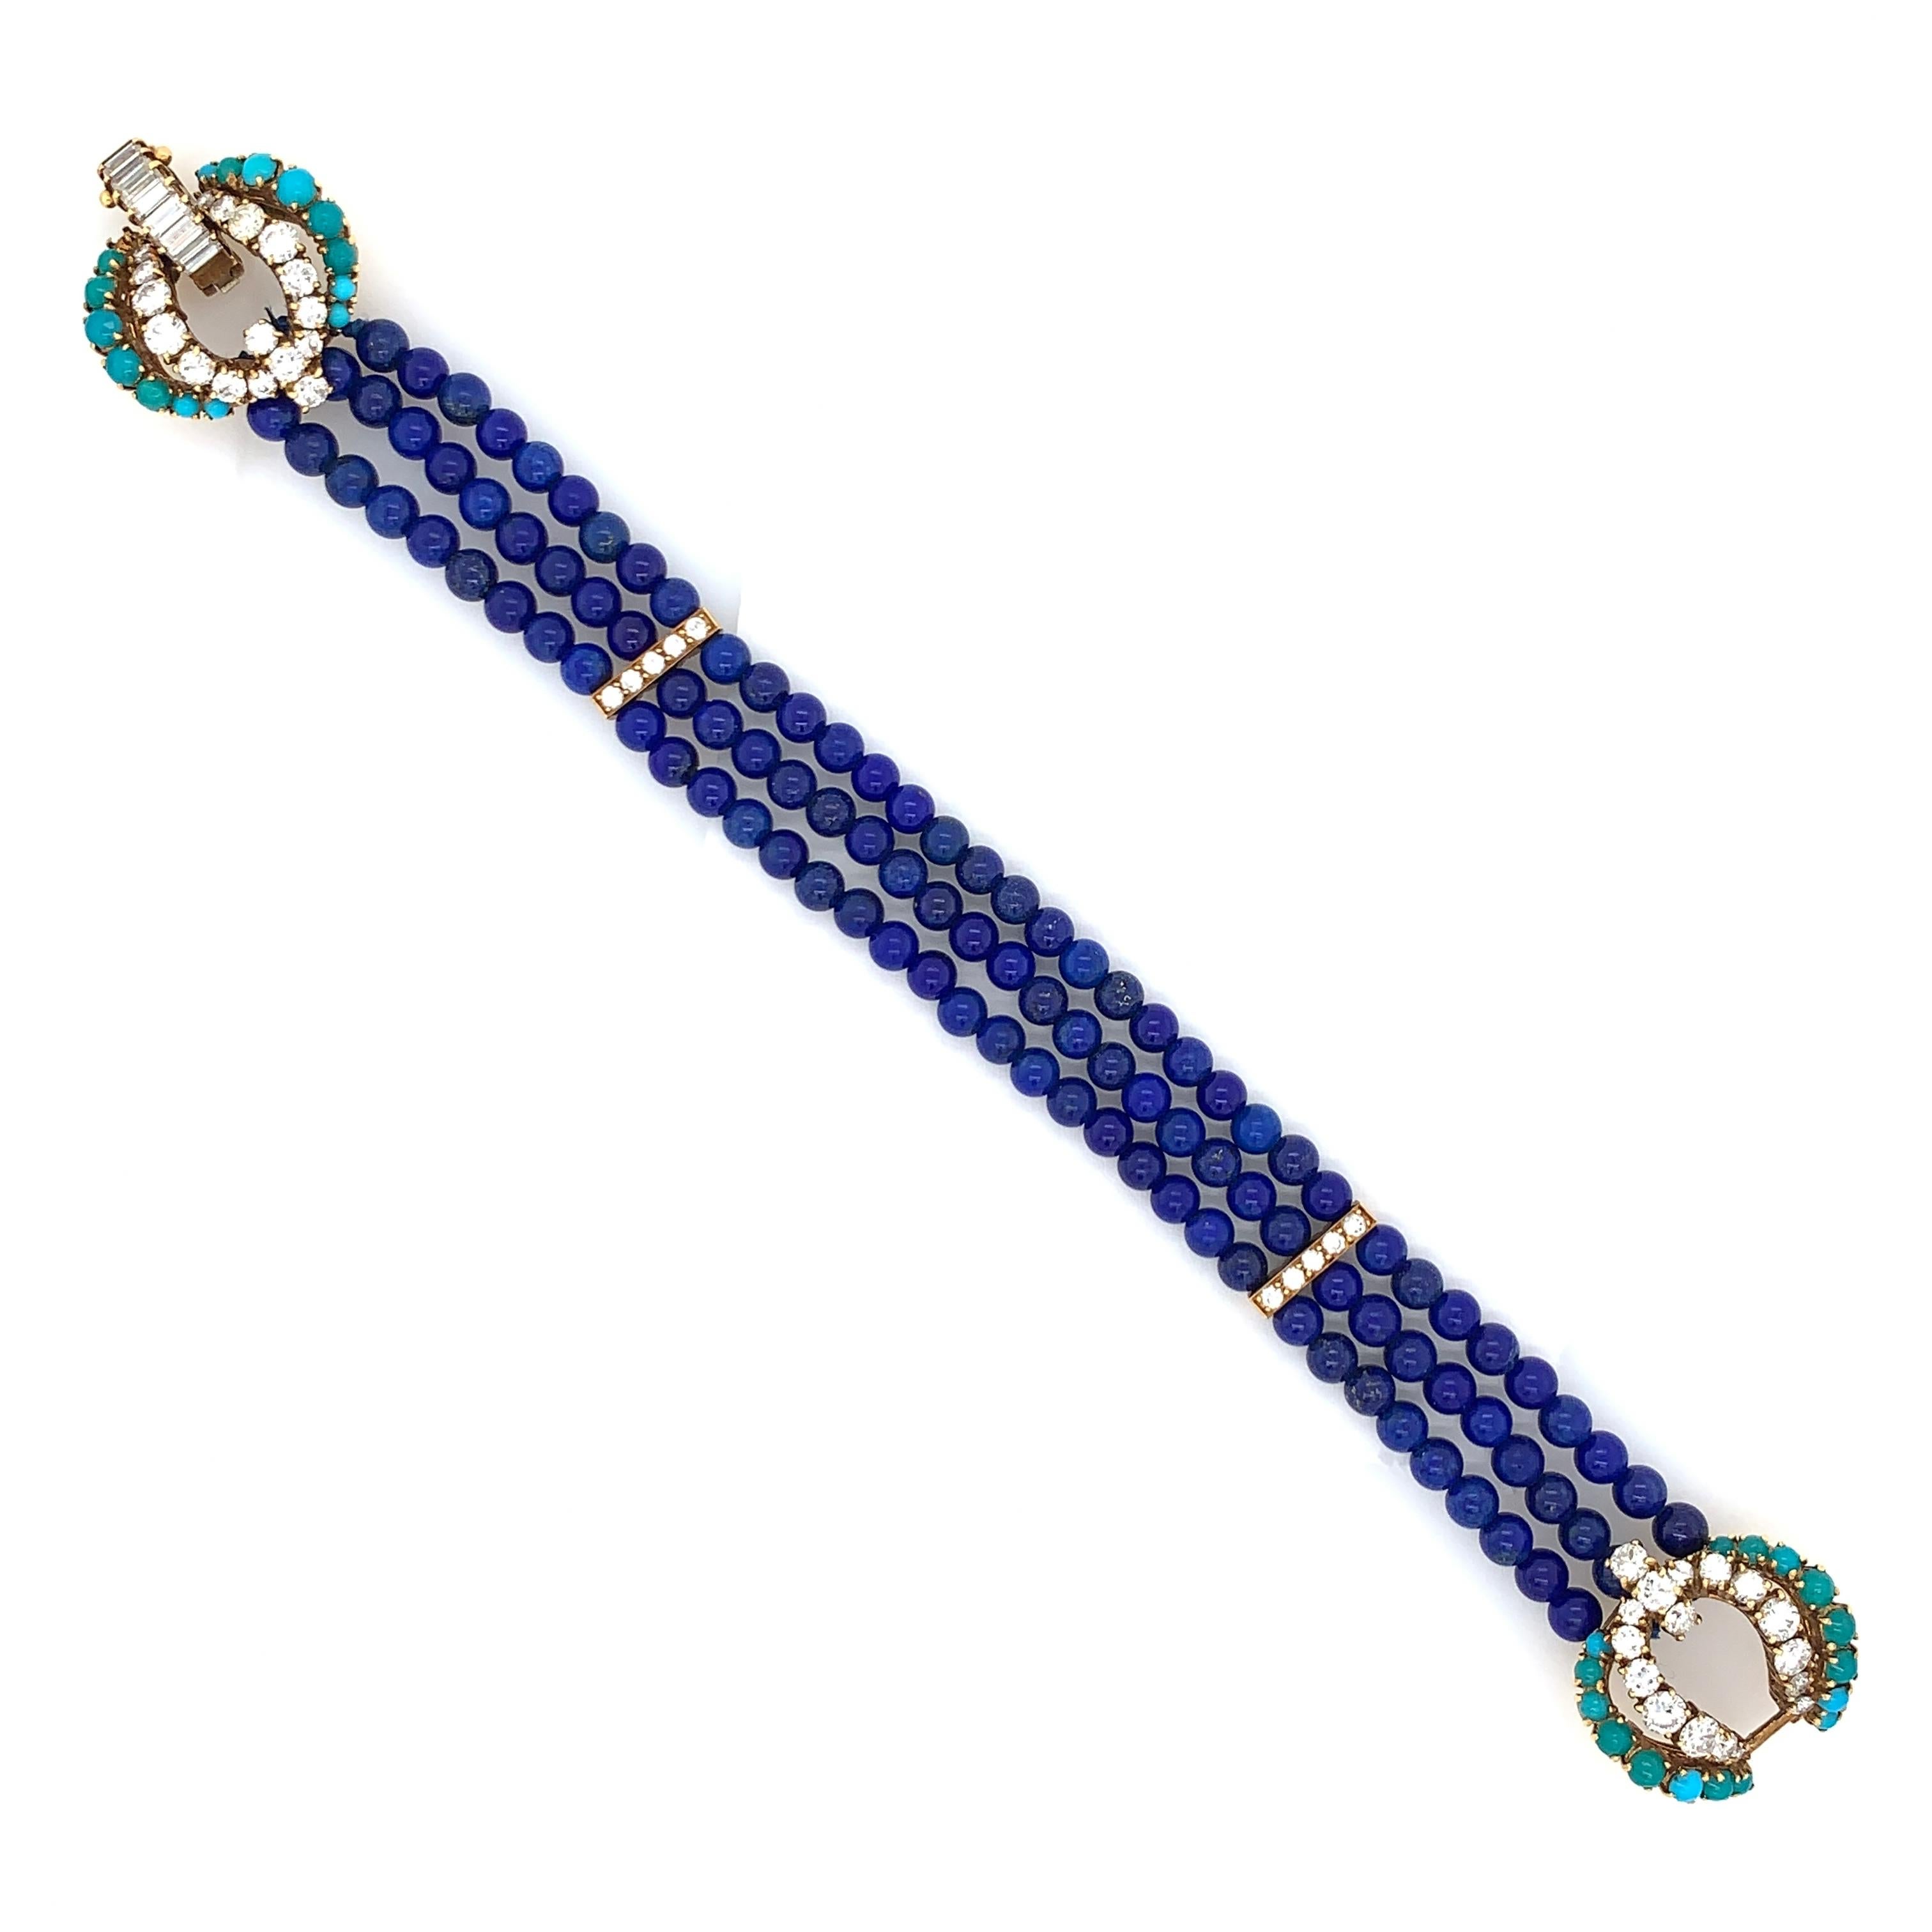 This piece consists of three rows of round lapis lazuli beads measuring approximately 3.80 mm in diameter strung with two yellow gold spacer bars containing 10 round brilliant cut diamonds weighing approximately 0.15 carat total and a yellow gold